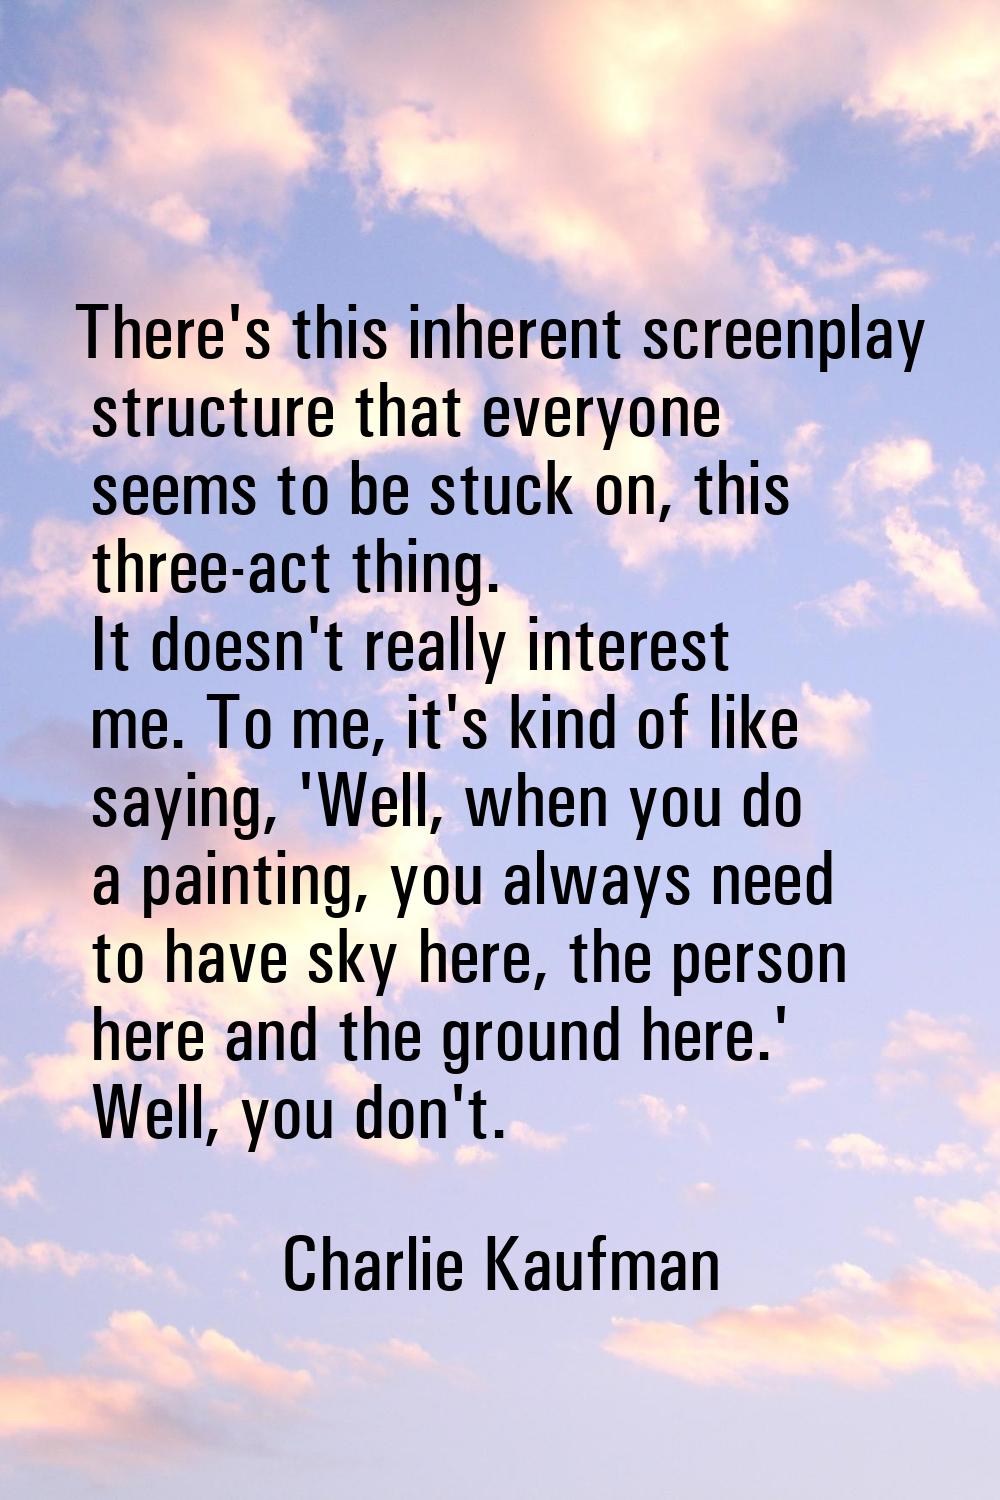 There's this inherent screenplay structure that everyone seems to be stuck on, this three-act thing